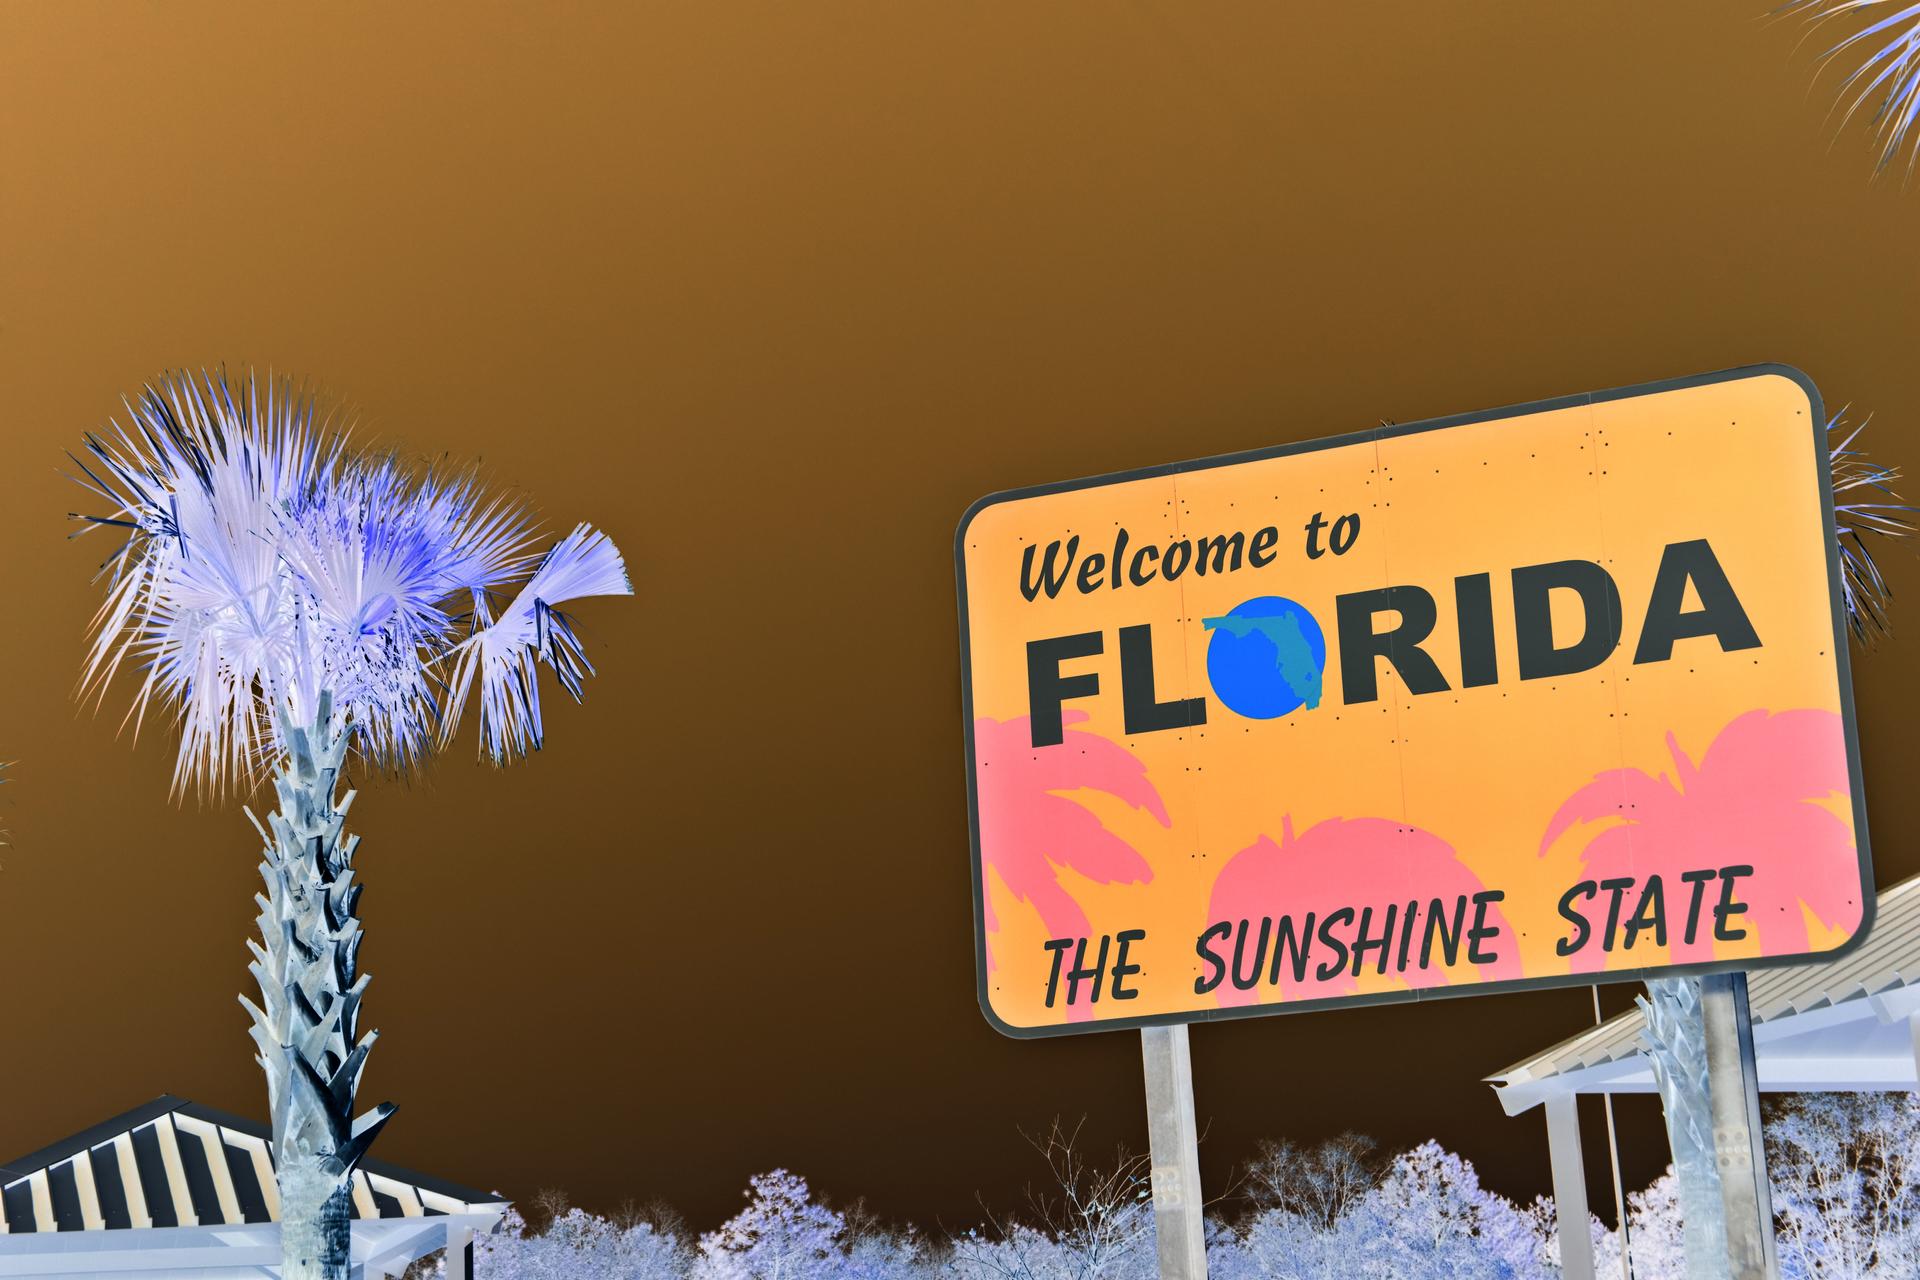 Welcome to the Sunshine State.